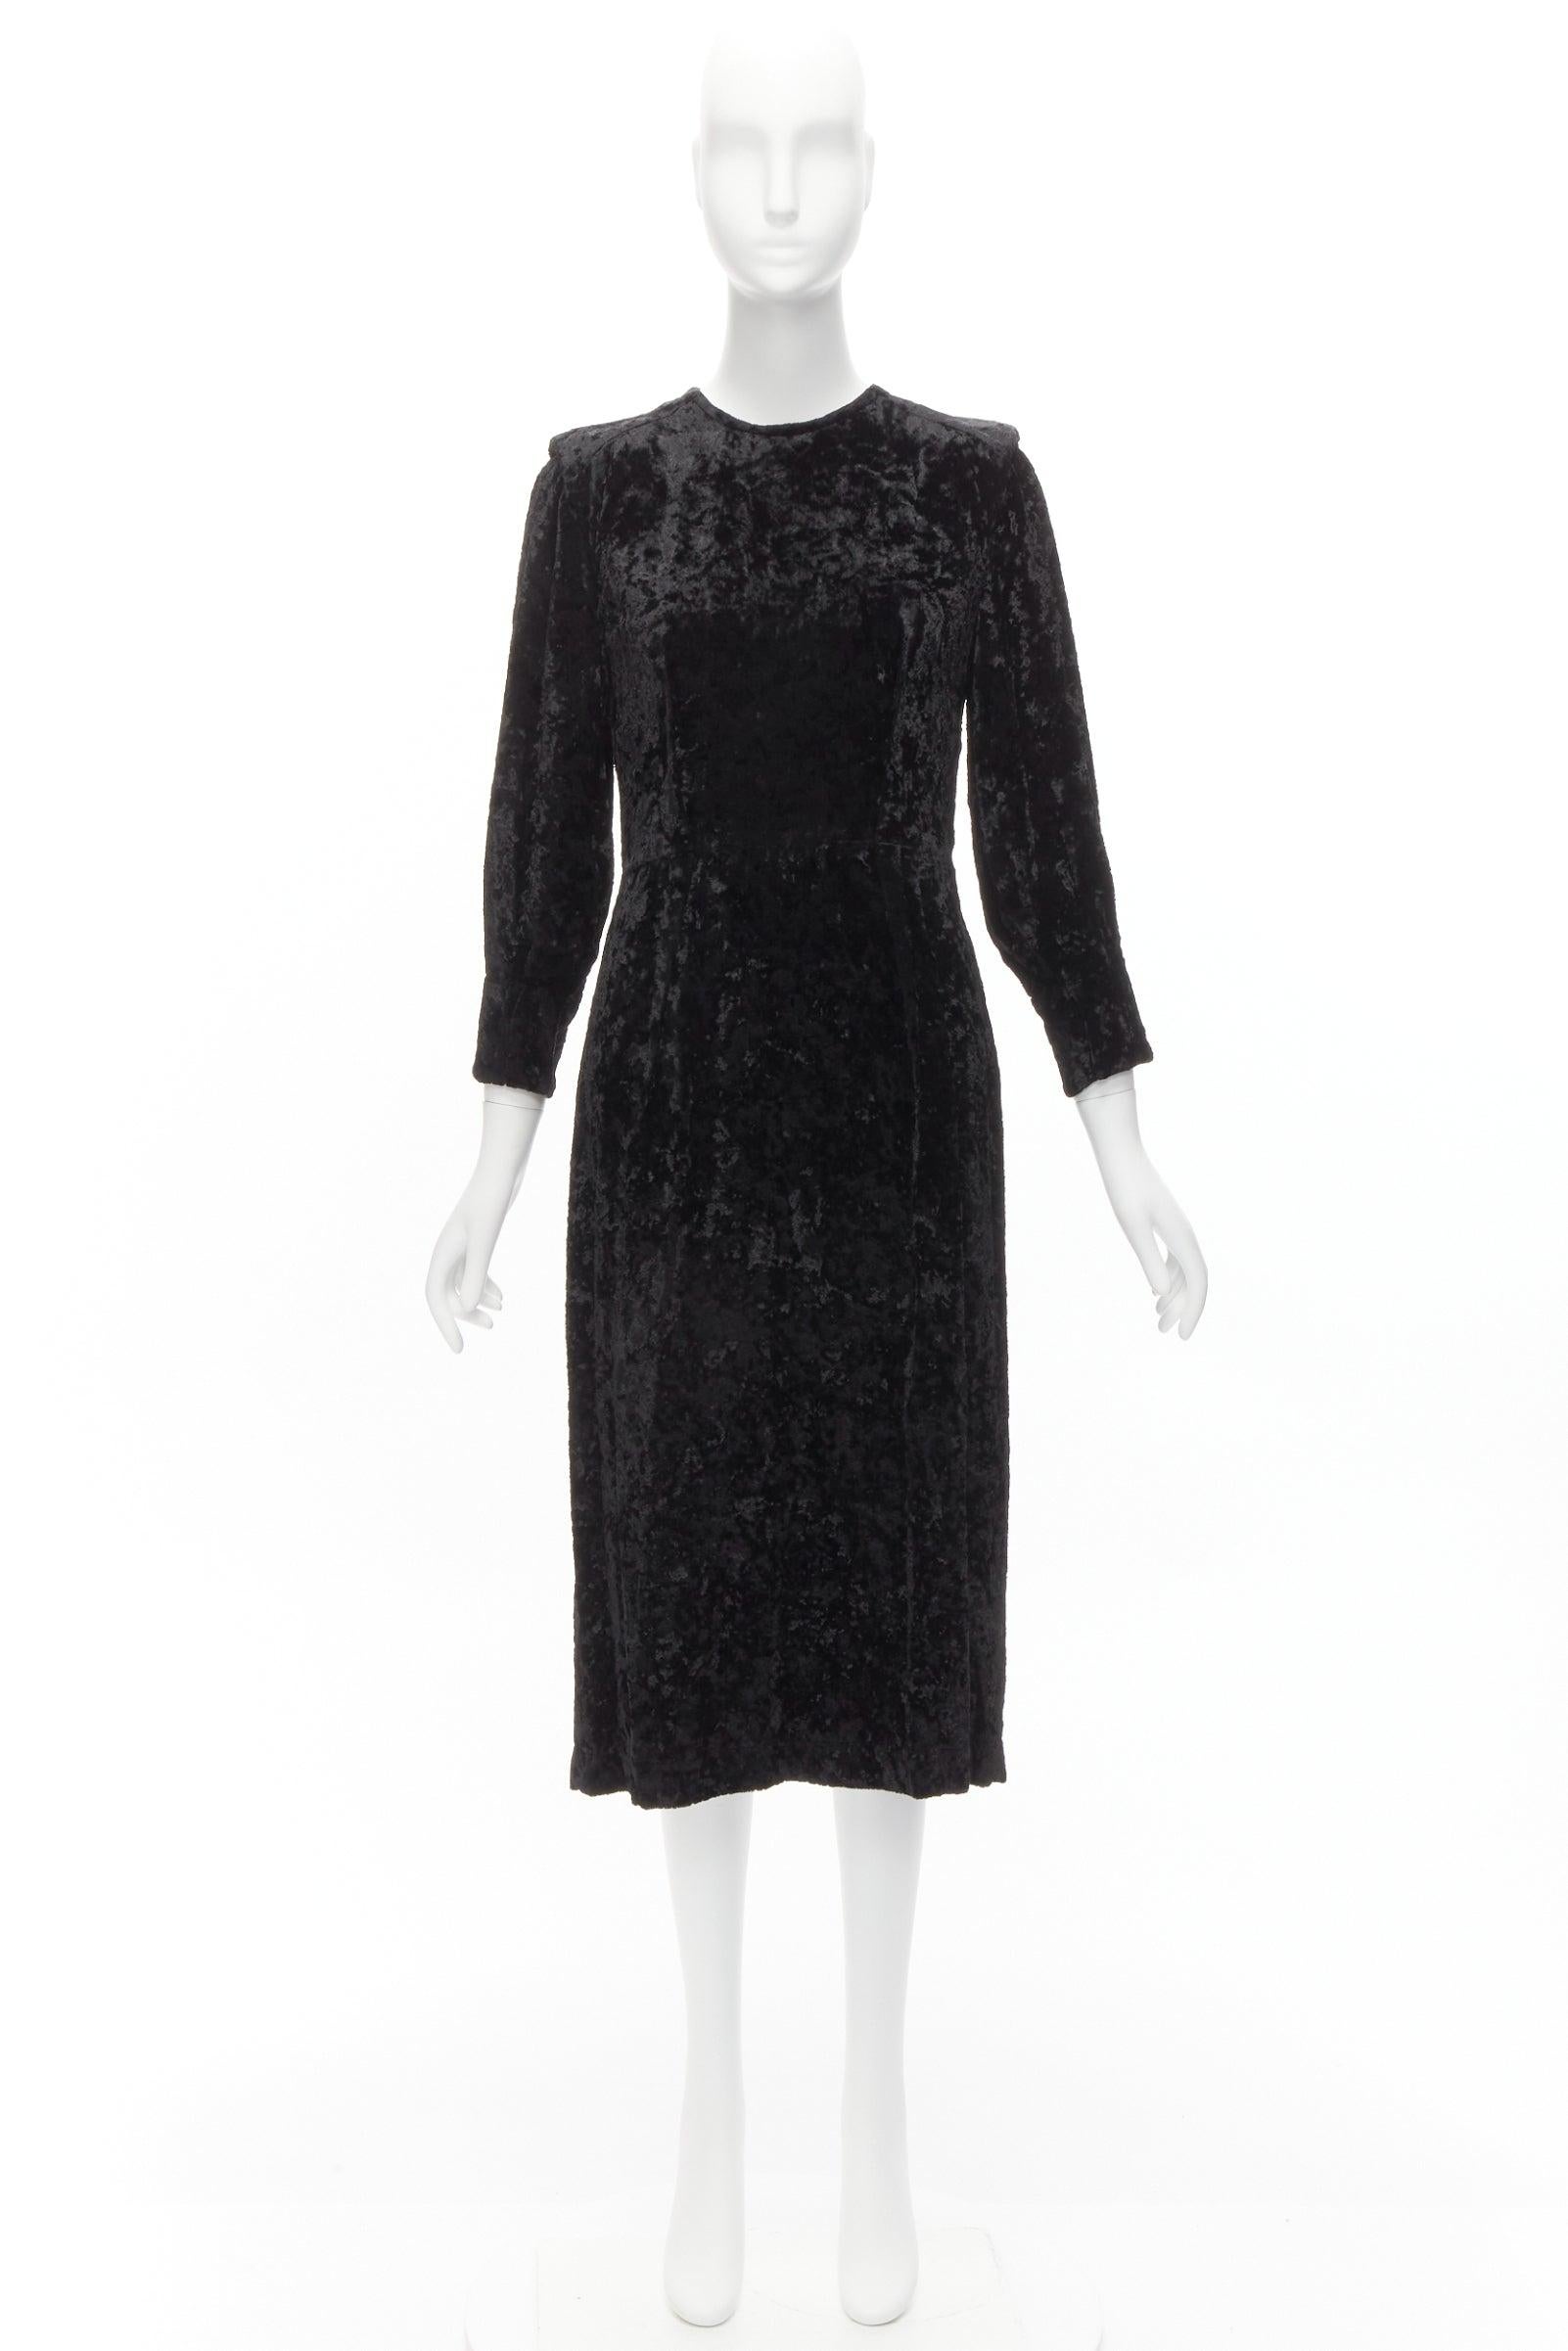 TOGA ARCHIVES PULLA crushed velvet twill layered tie back zip midi dress FR36 S For Sale 4